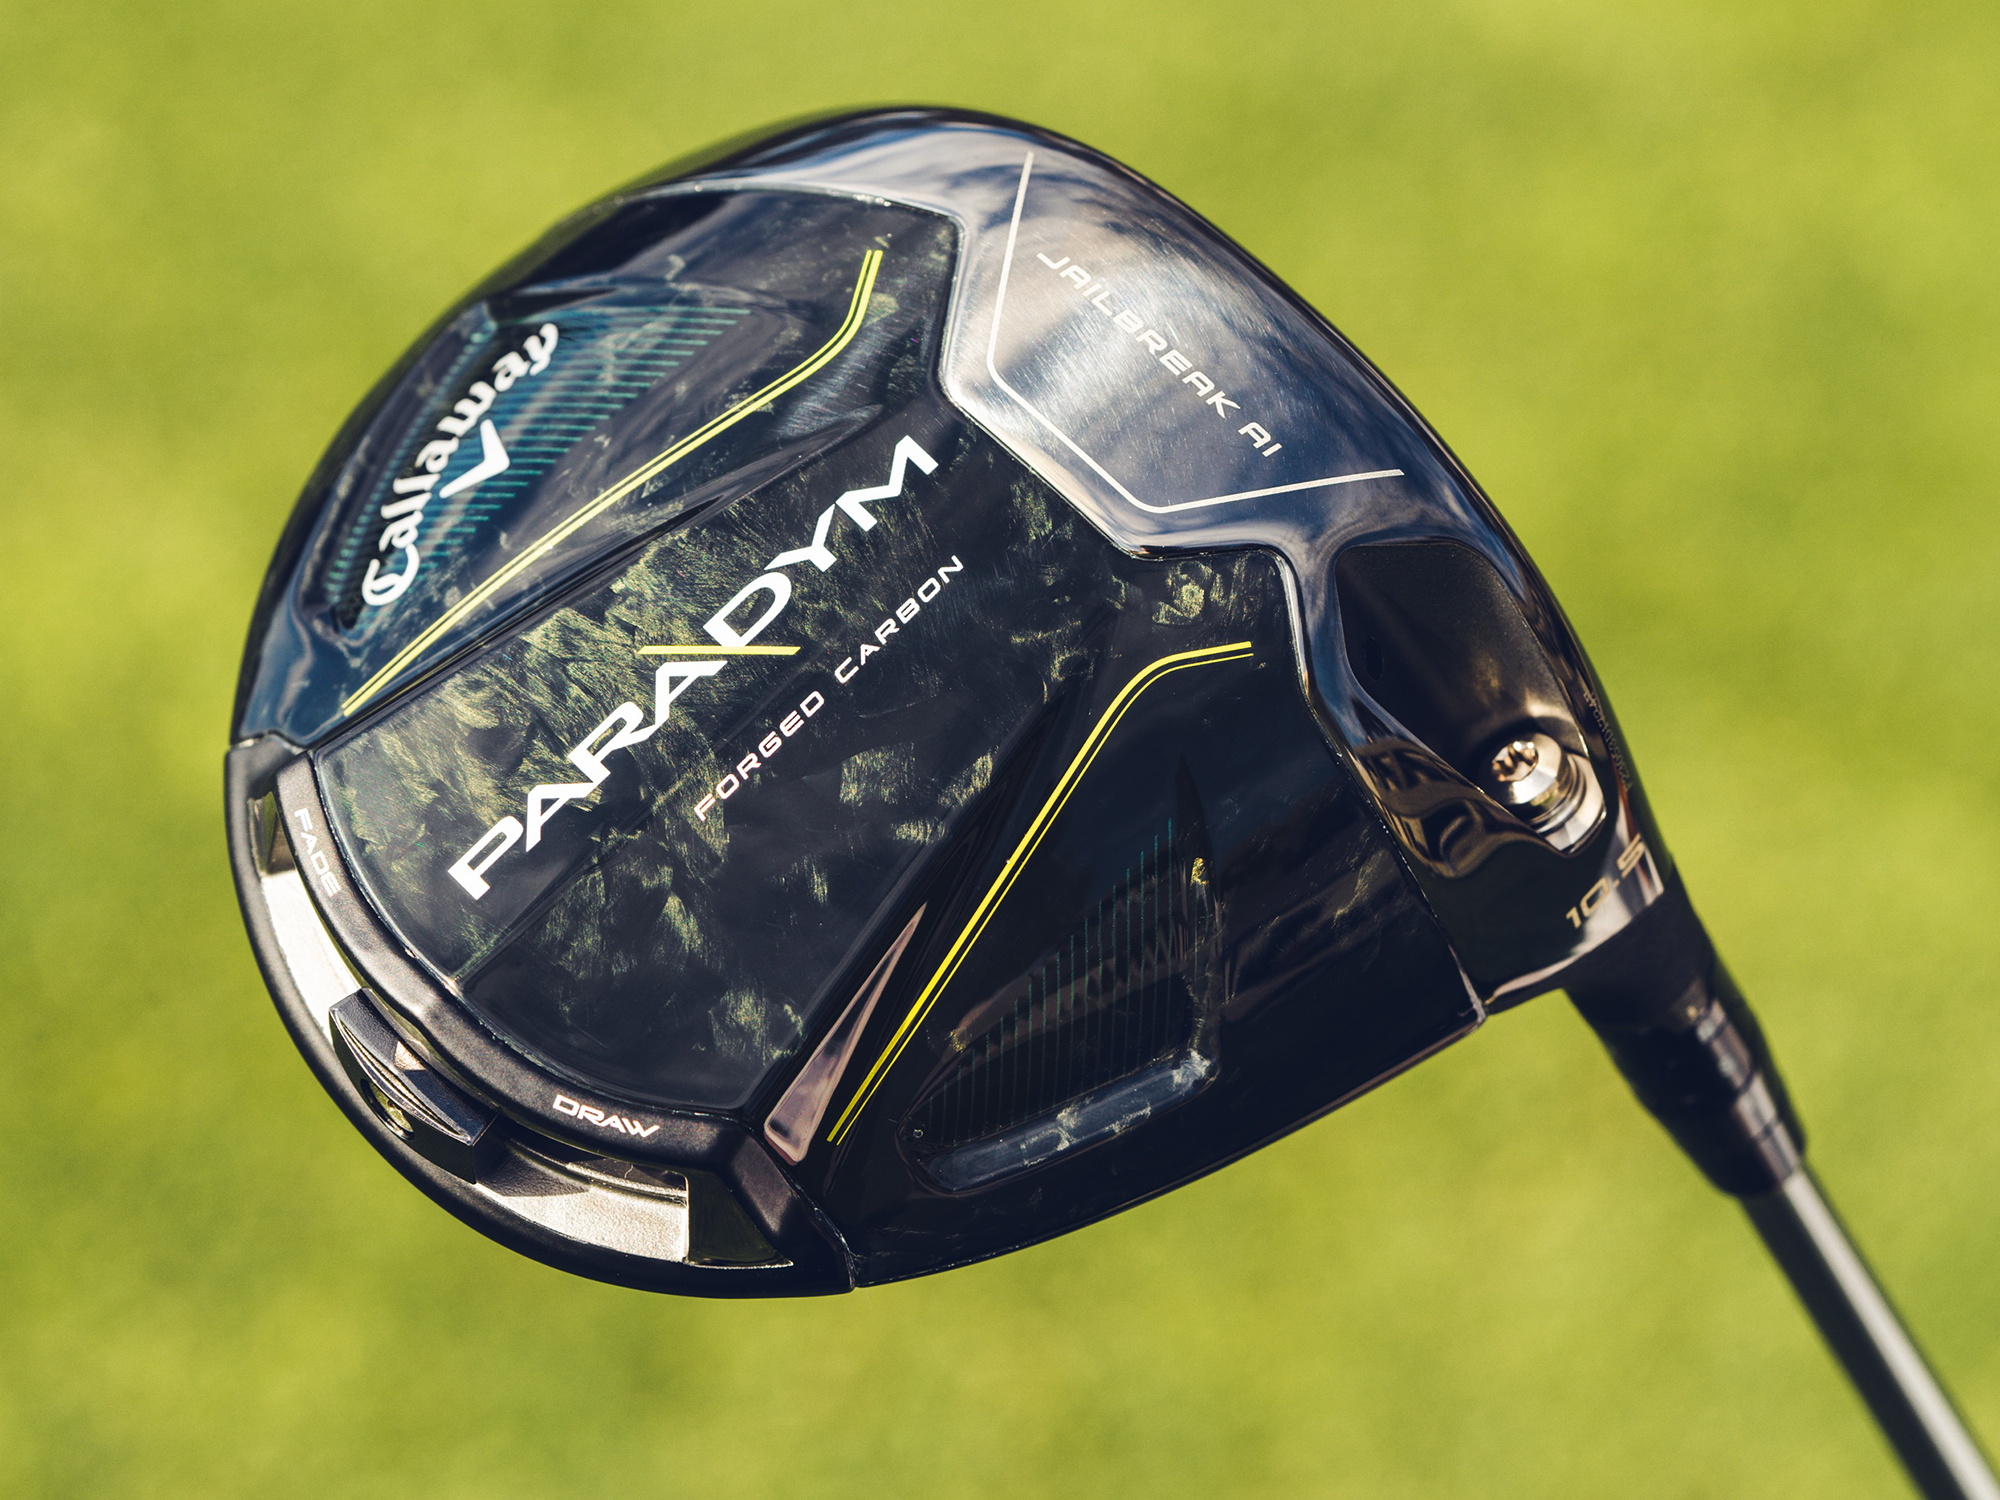 Callaway Paradym: New Limited Edition Drivers